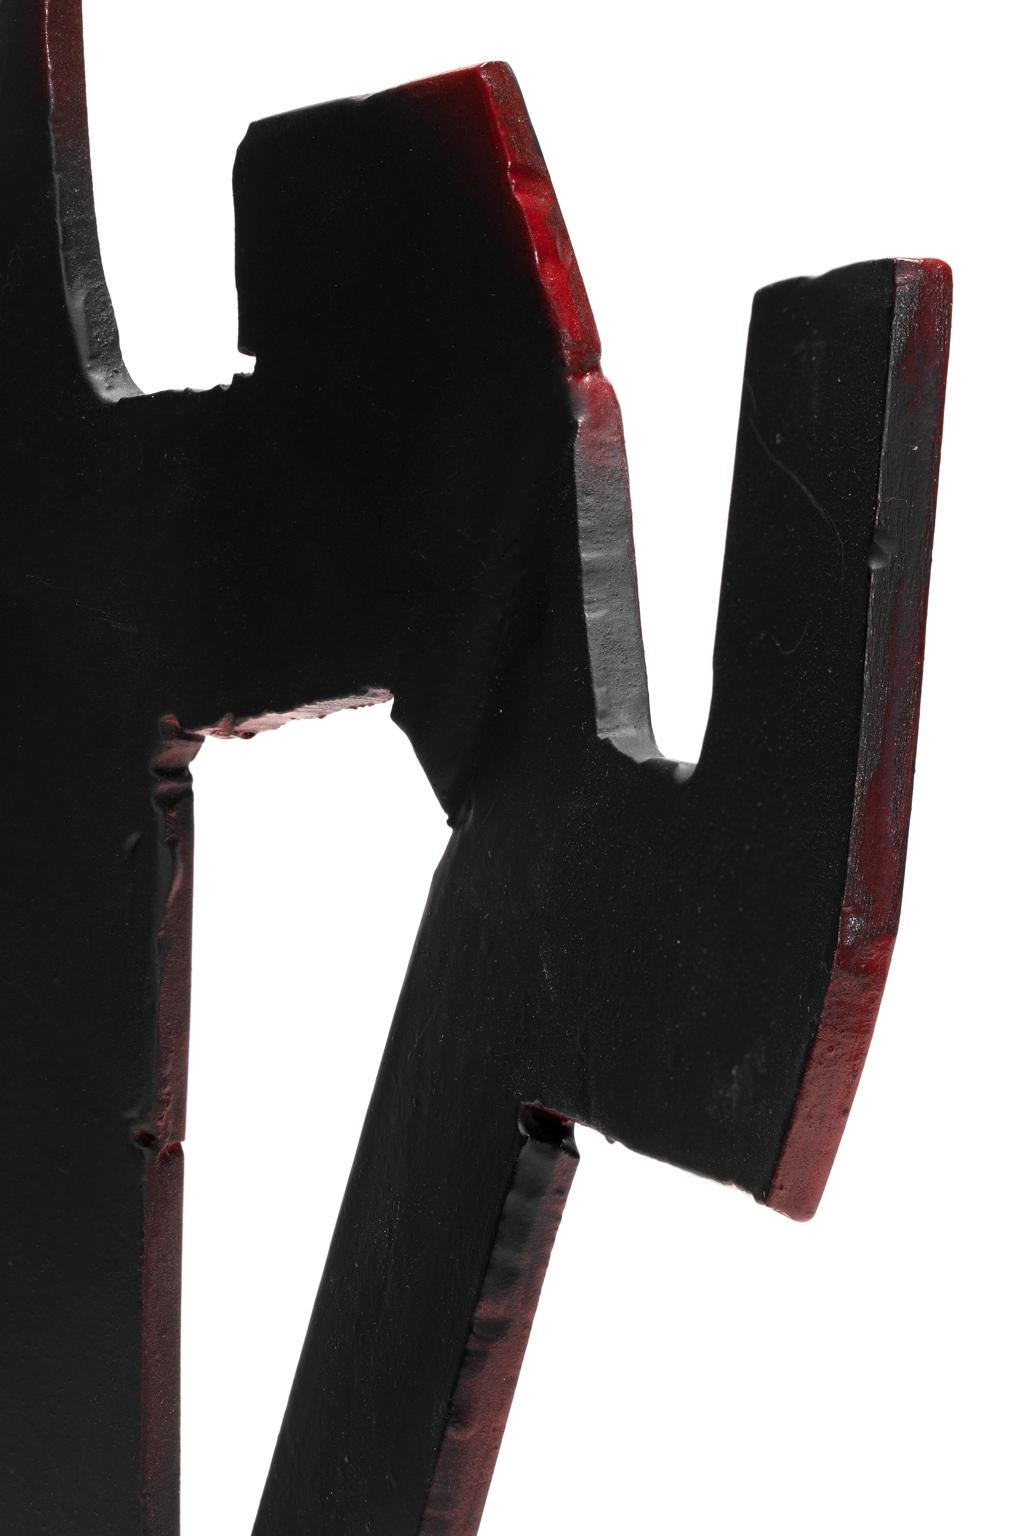 Tony Rosenthal Abstract Sculpture Blackened Steel Red Blushes For Sale 3